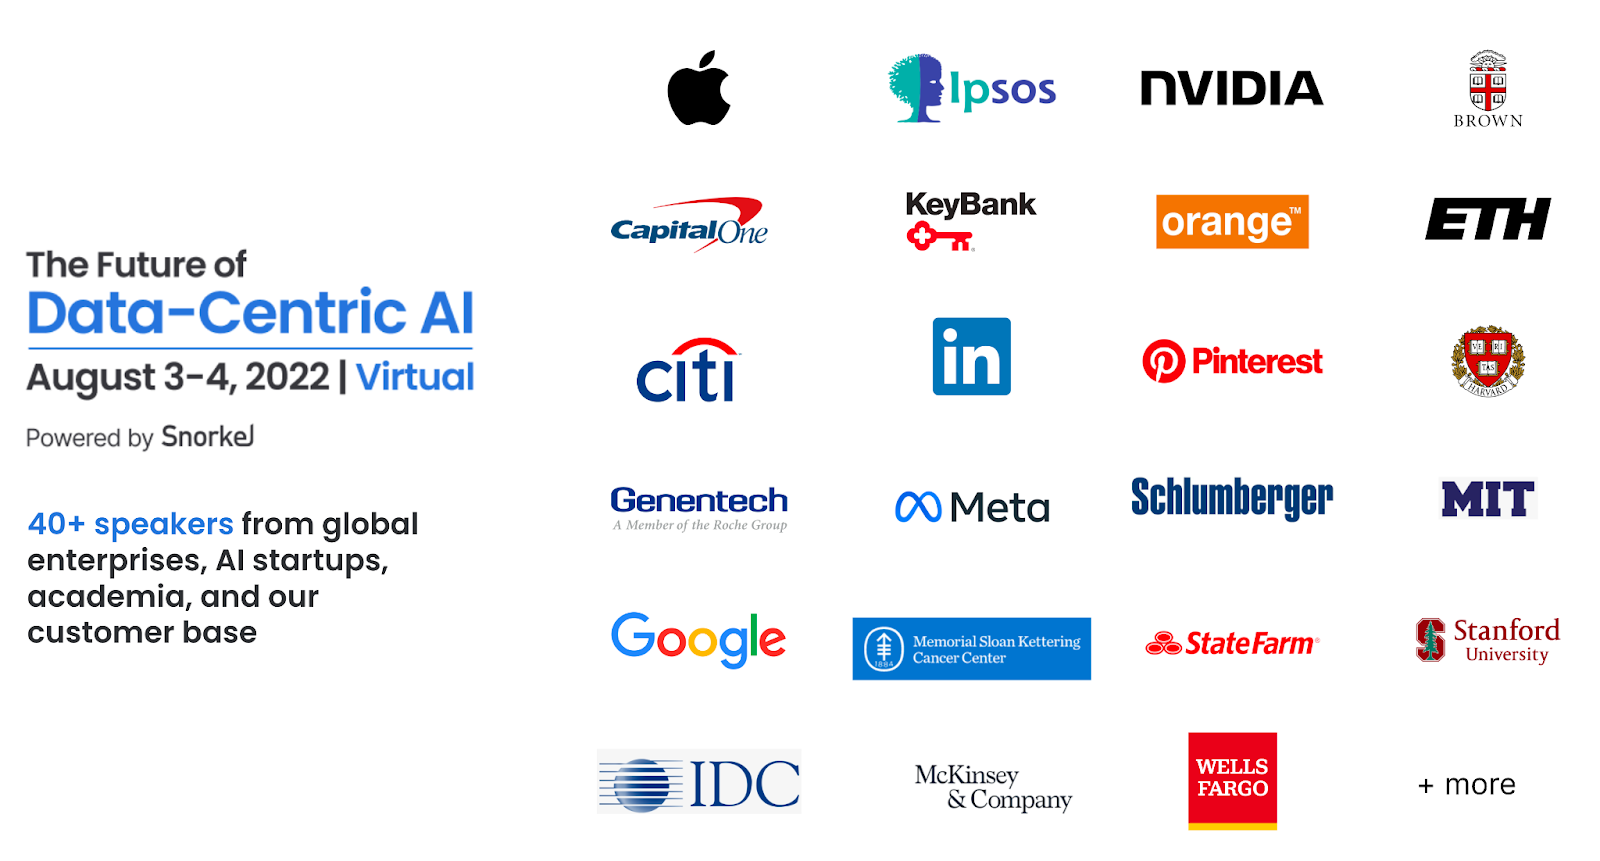 Speakers from some of the world’s most advanced AI organizations at The Future of Data-Centric AI